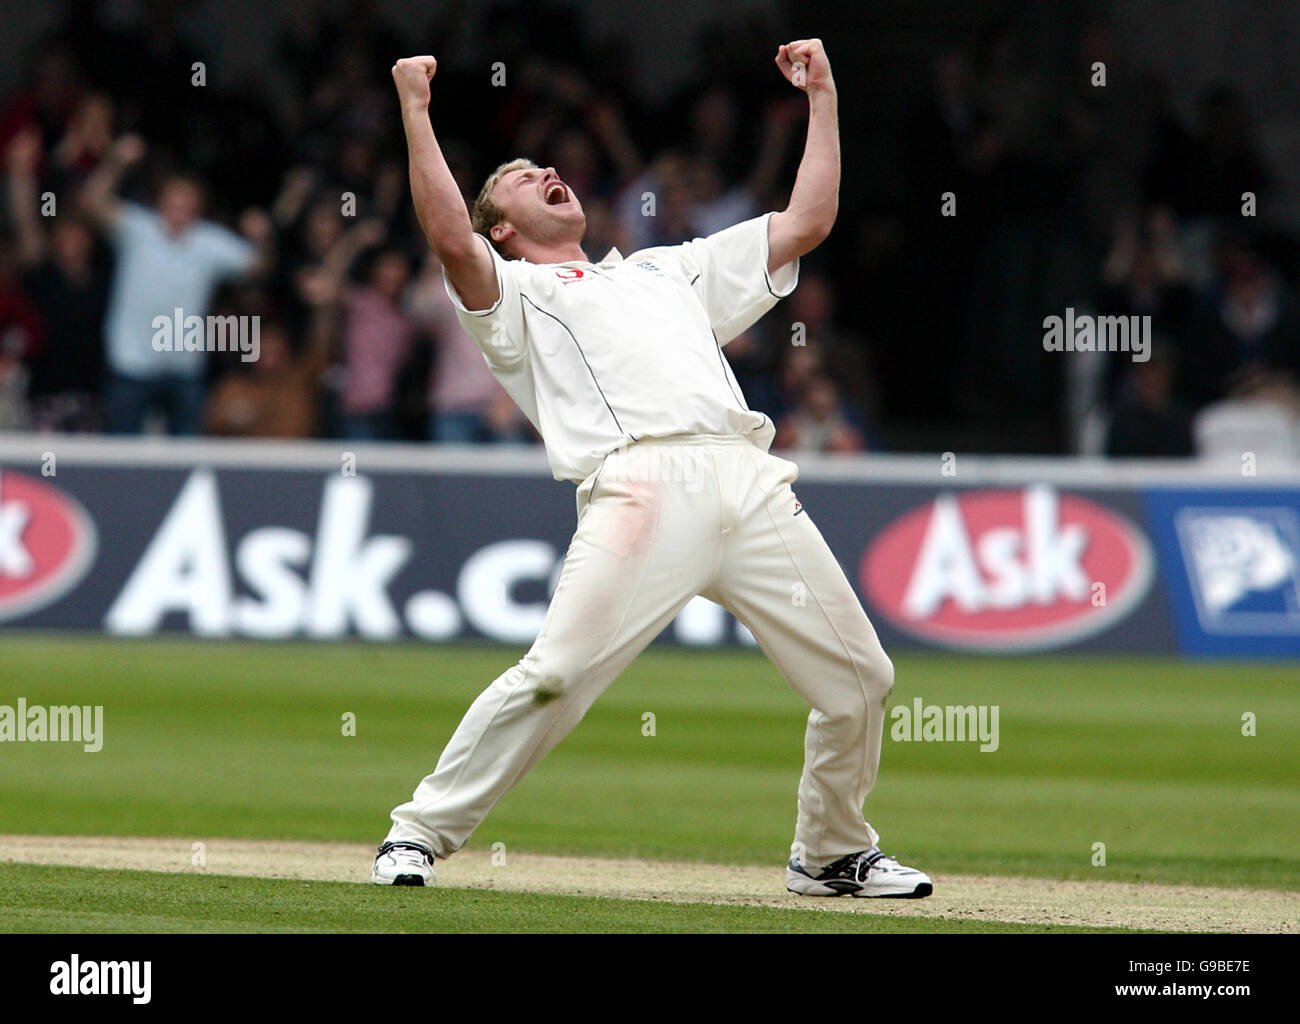 England's Andrew Flintoff celebrates taking the wicket of Sri Lanka's Mahela Jayawardene during the fourth day of the first npower Test match at Lord's cricket ground, London. Stock Photo